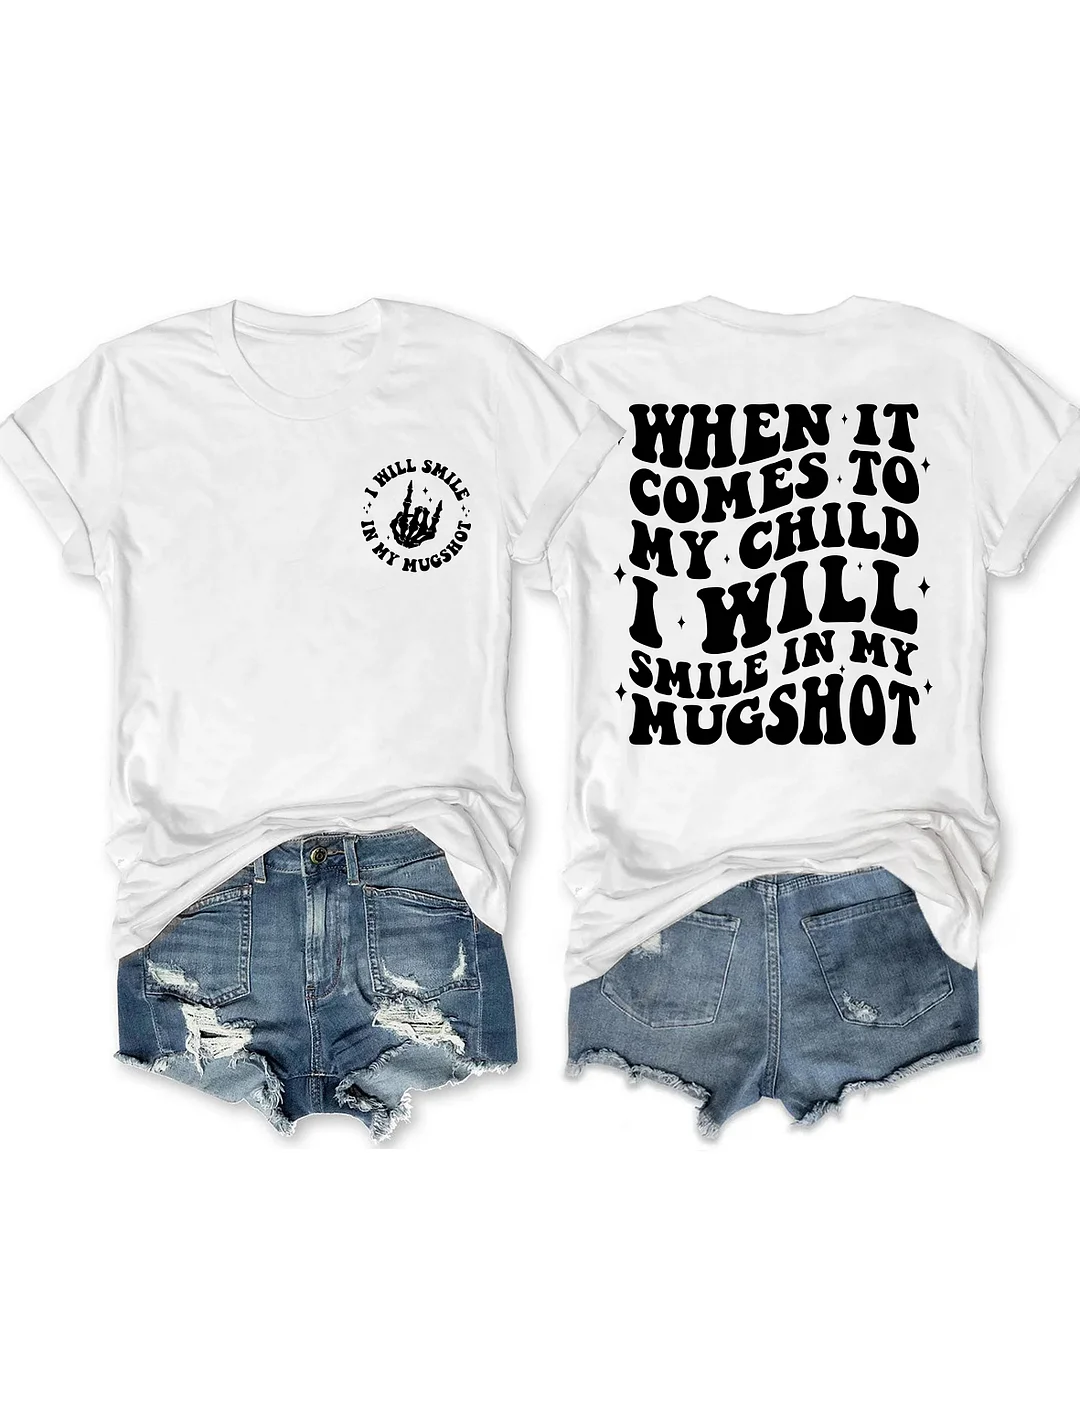 When It Comes To My Child I Will Smile In My Mugshot T-shirt